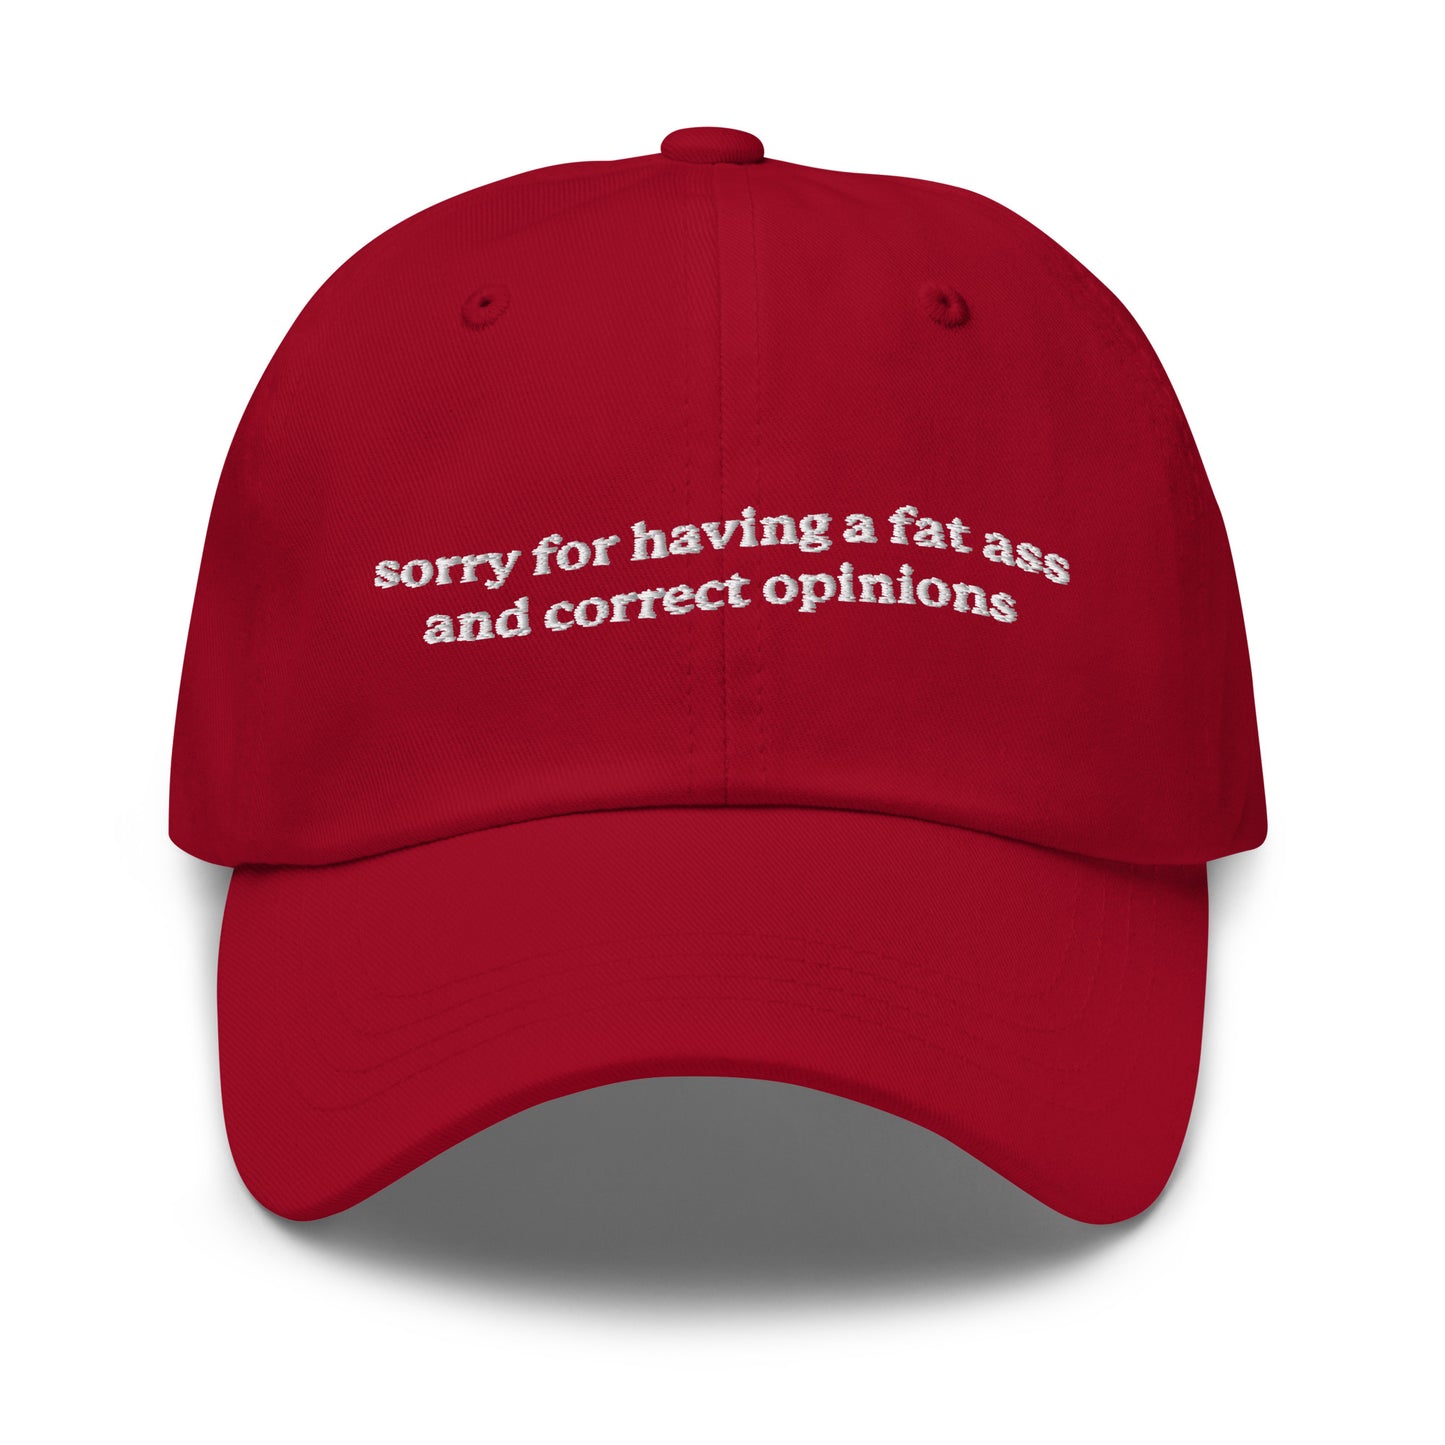 Fat Ass & Correct Opinions hat